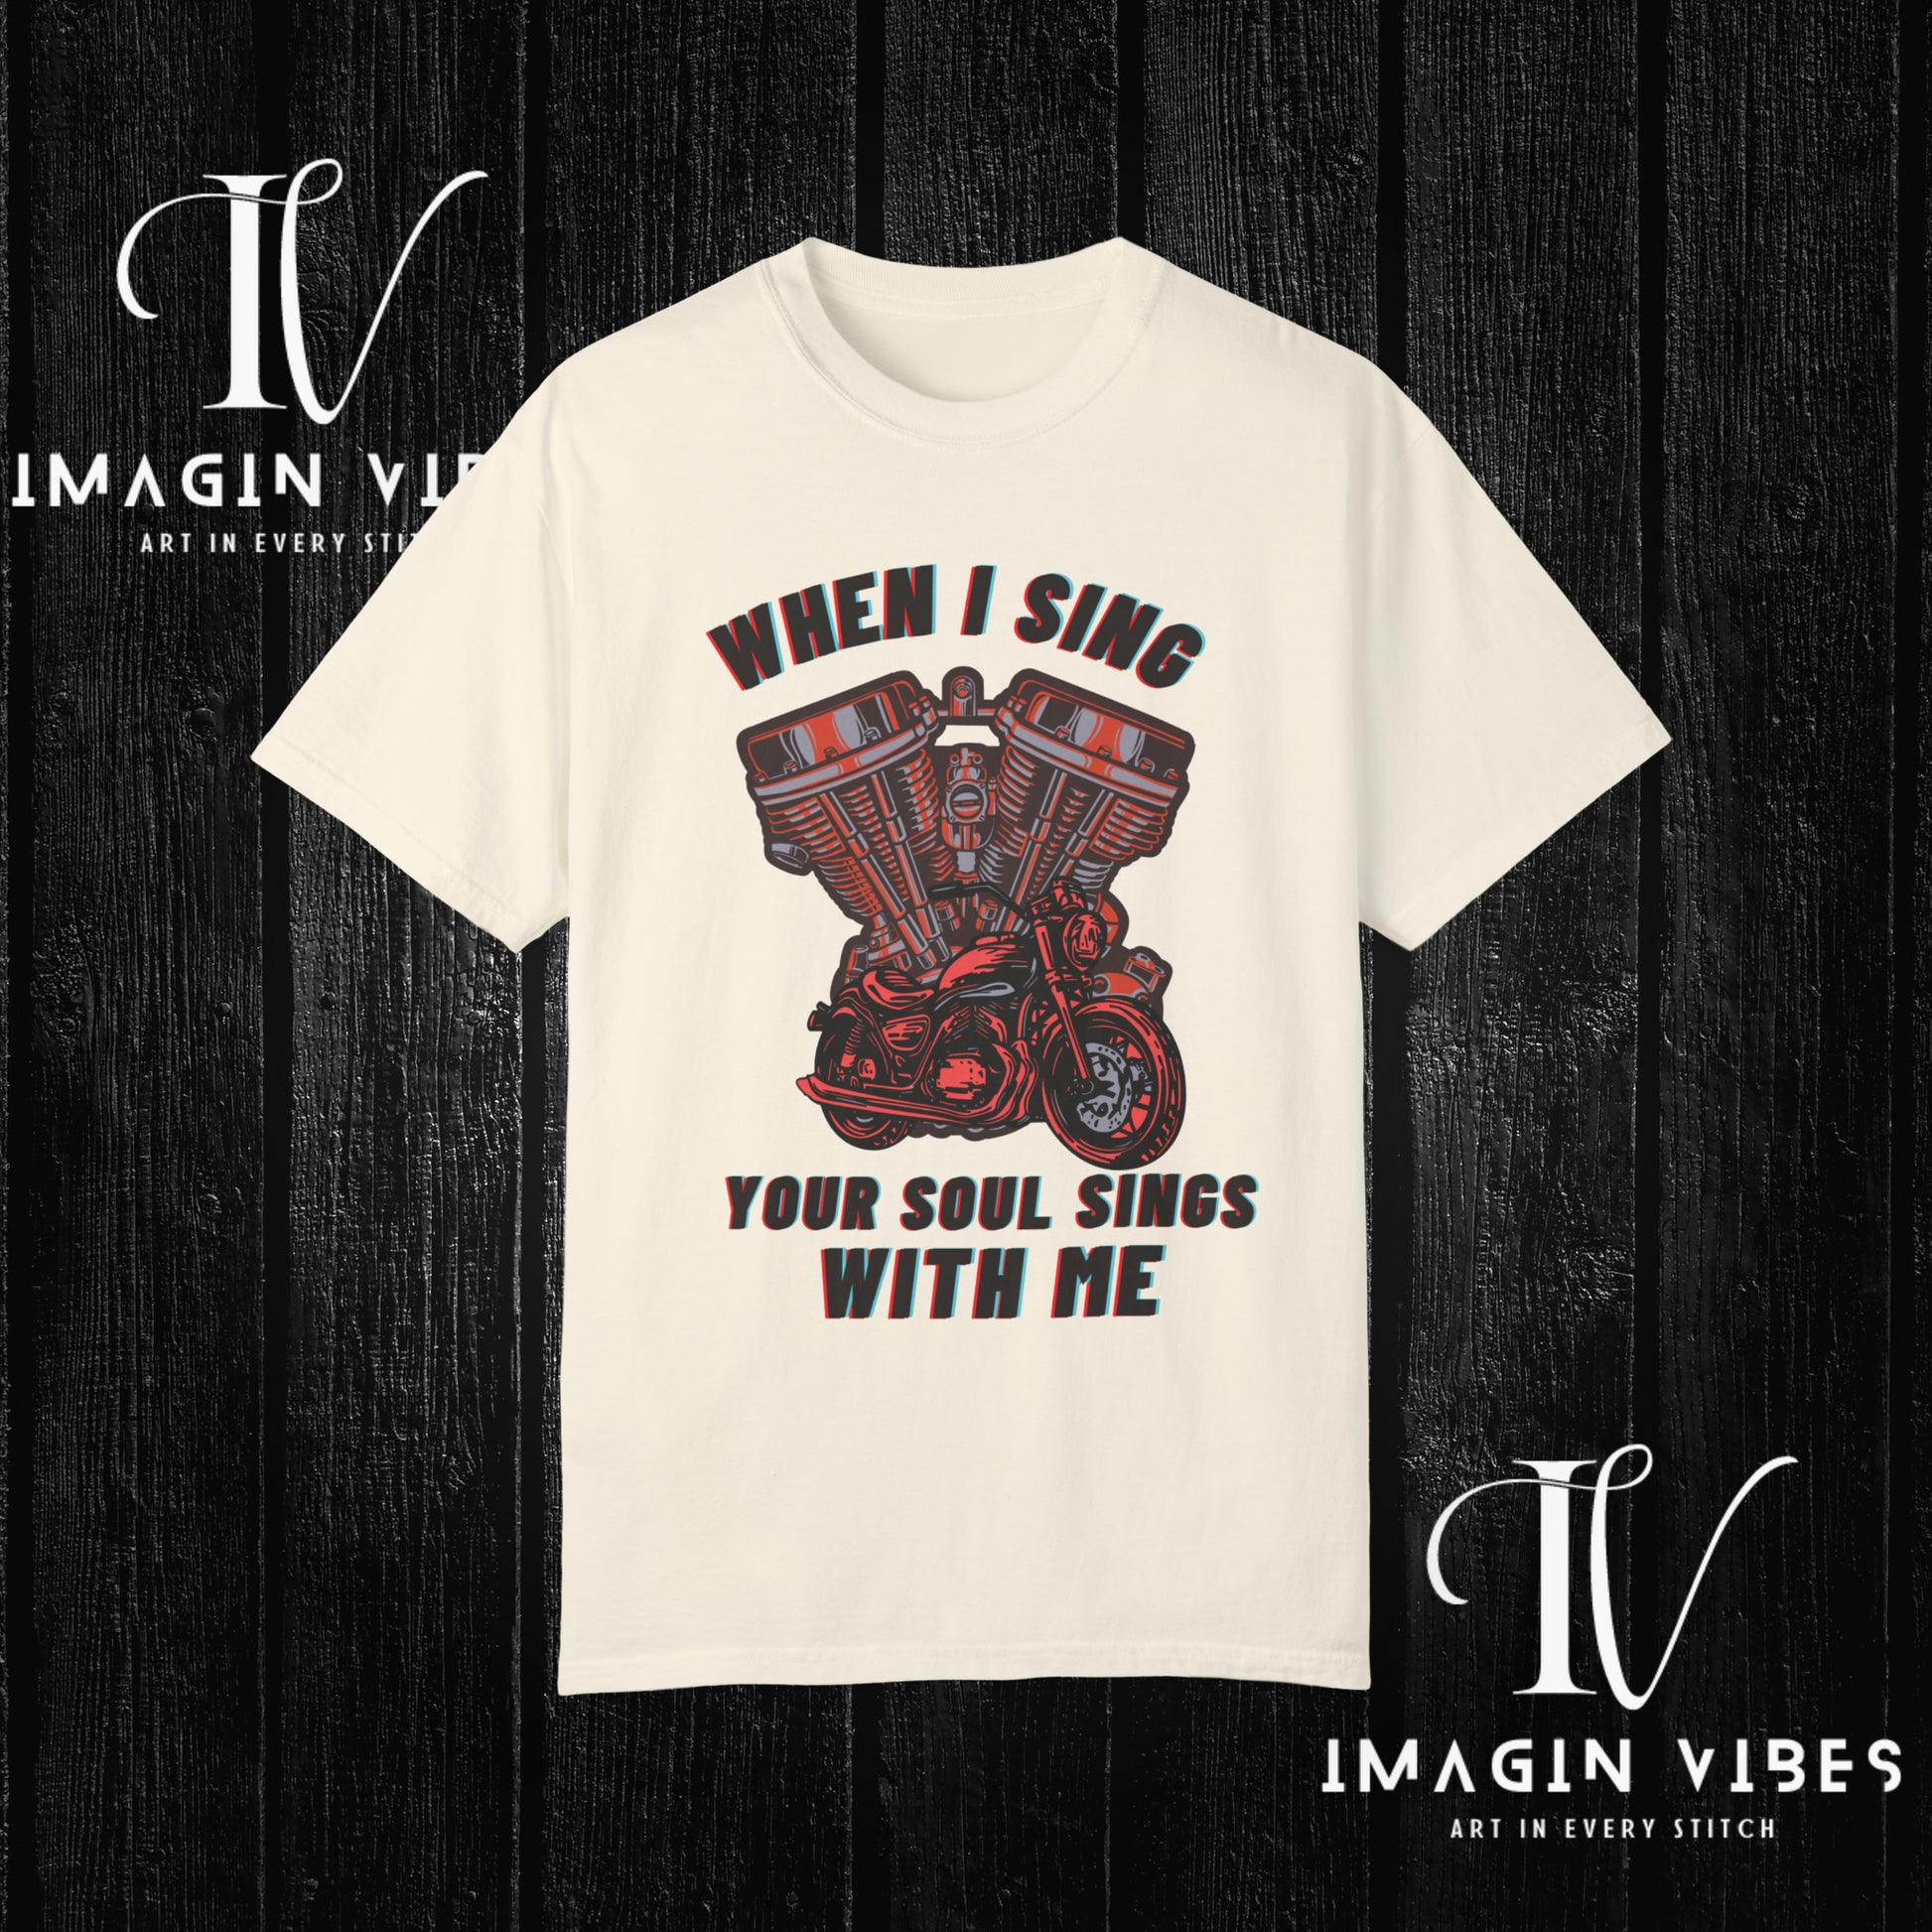 Motorcycle Unisex T-shirt - When I Sing, Your Soul Sings With Me - Motorcycle Riding Shirt, Biker Tee, Cool Biker Shirt USA T-Shirt Ivory S 